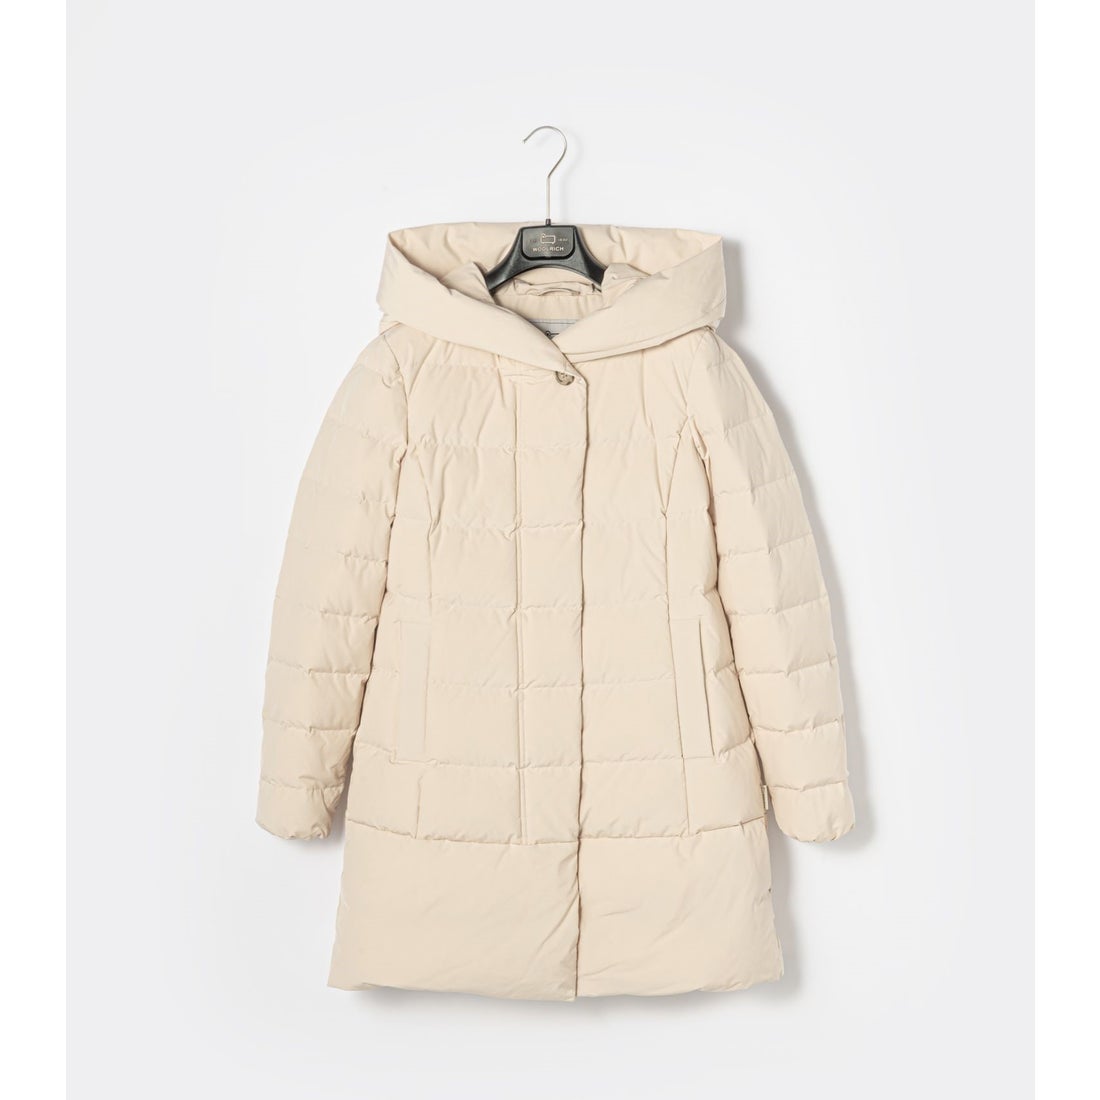 Woolrich Puffy ダウンパーカー　NOCPS1837 L/XL